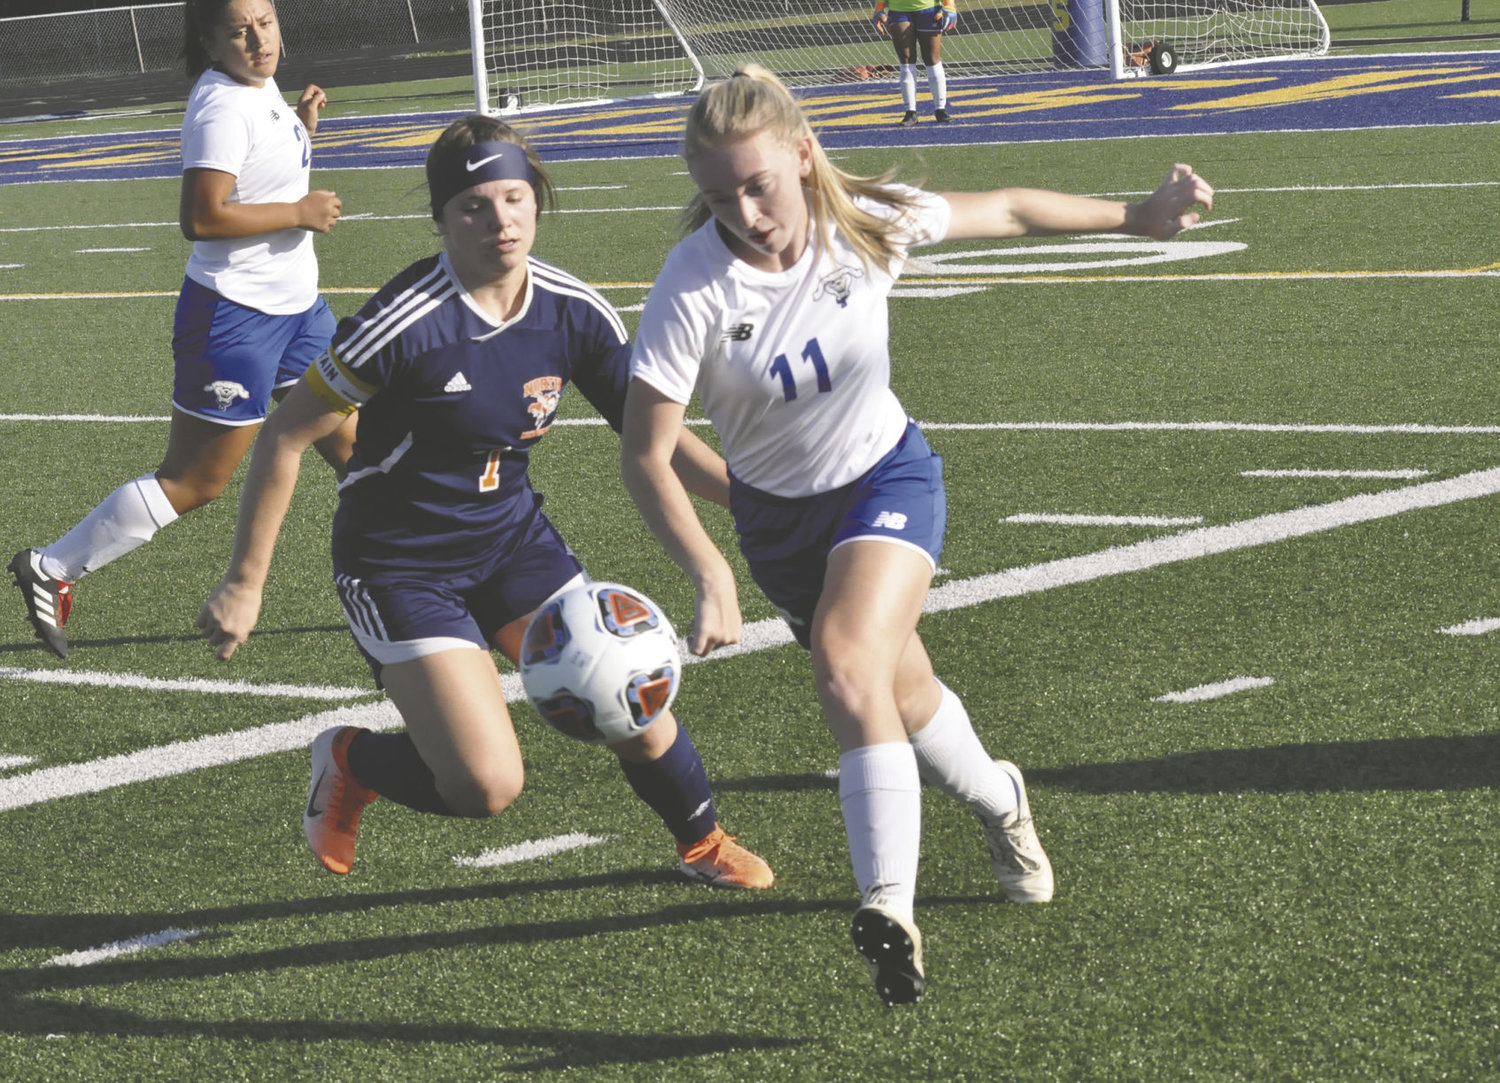 North Montgomery's Sidney Campbell battles with Frankfort' Peyton Myers. Campbell scored the Charger's first goal in a 3-1 win over the Hot Dogs.